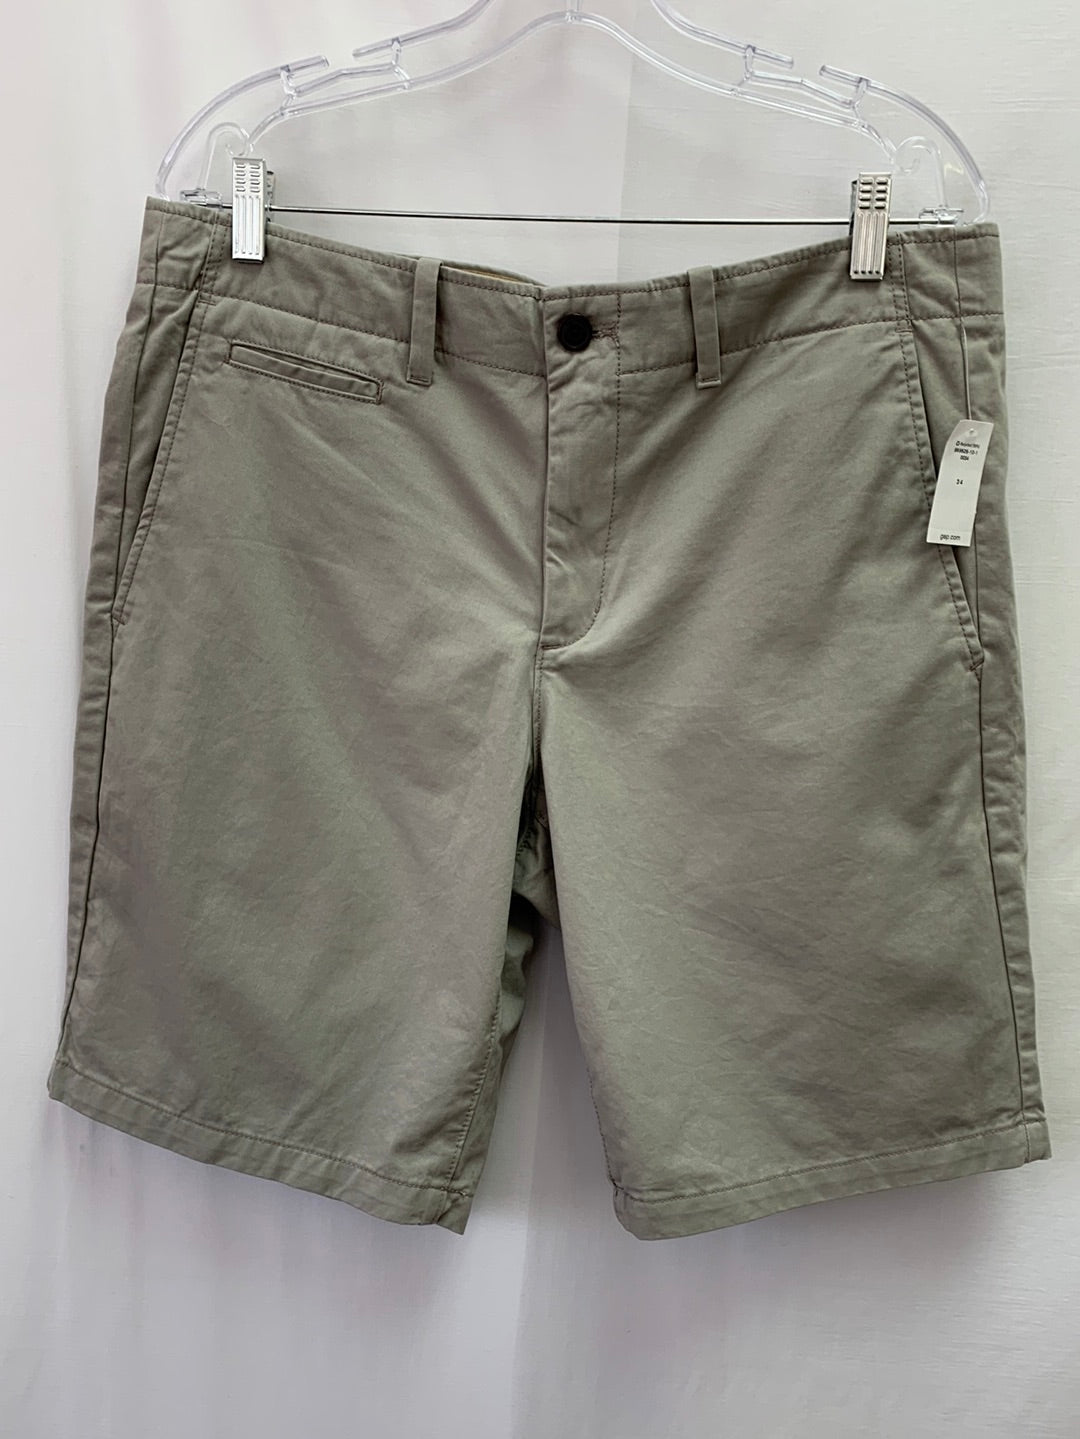 NWT - GAP khaki Lived-In Cotton Flat Front Shorts - Men's 34